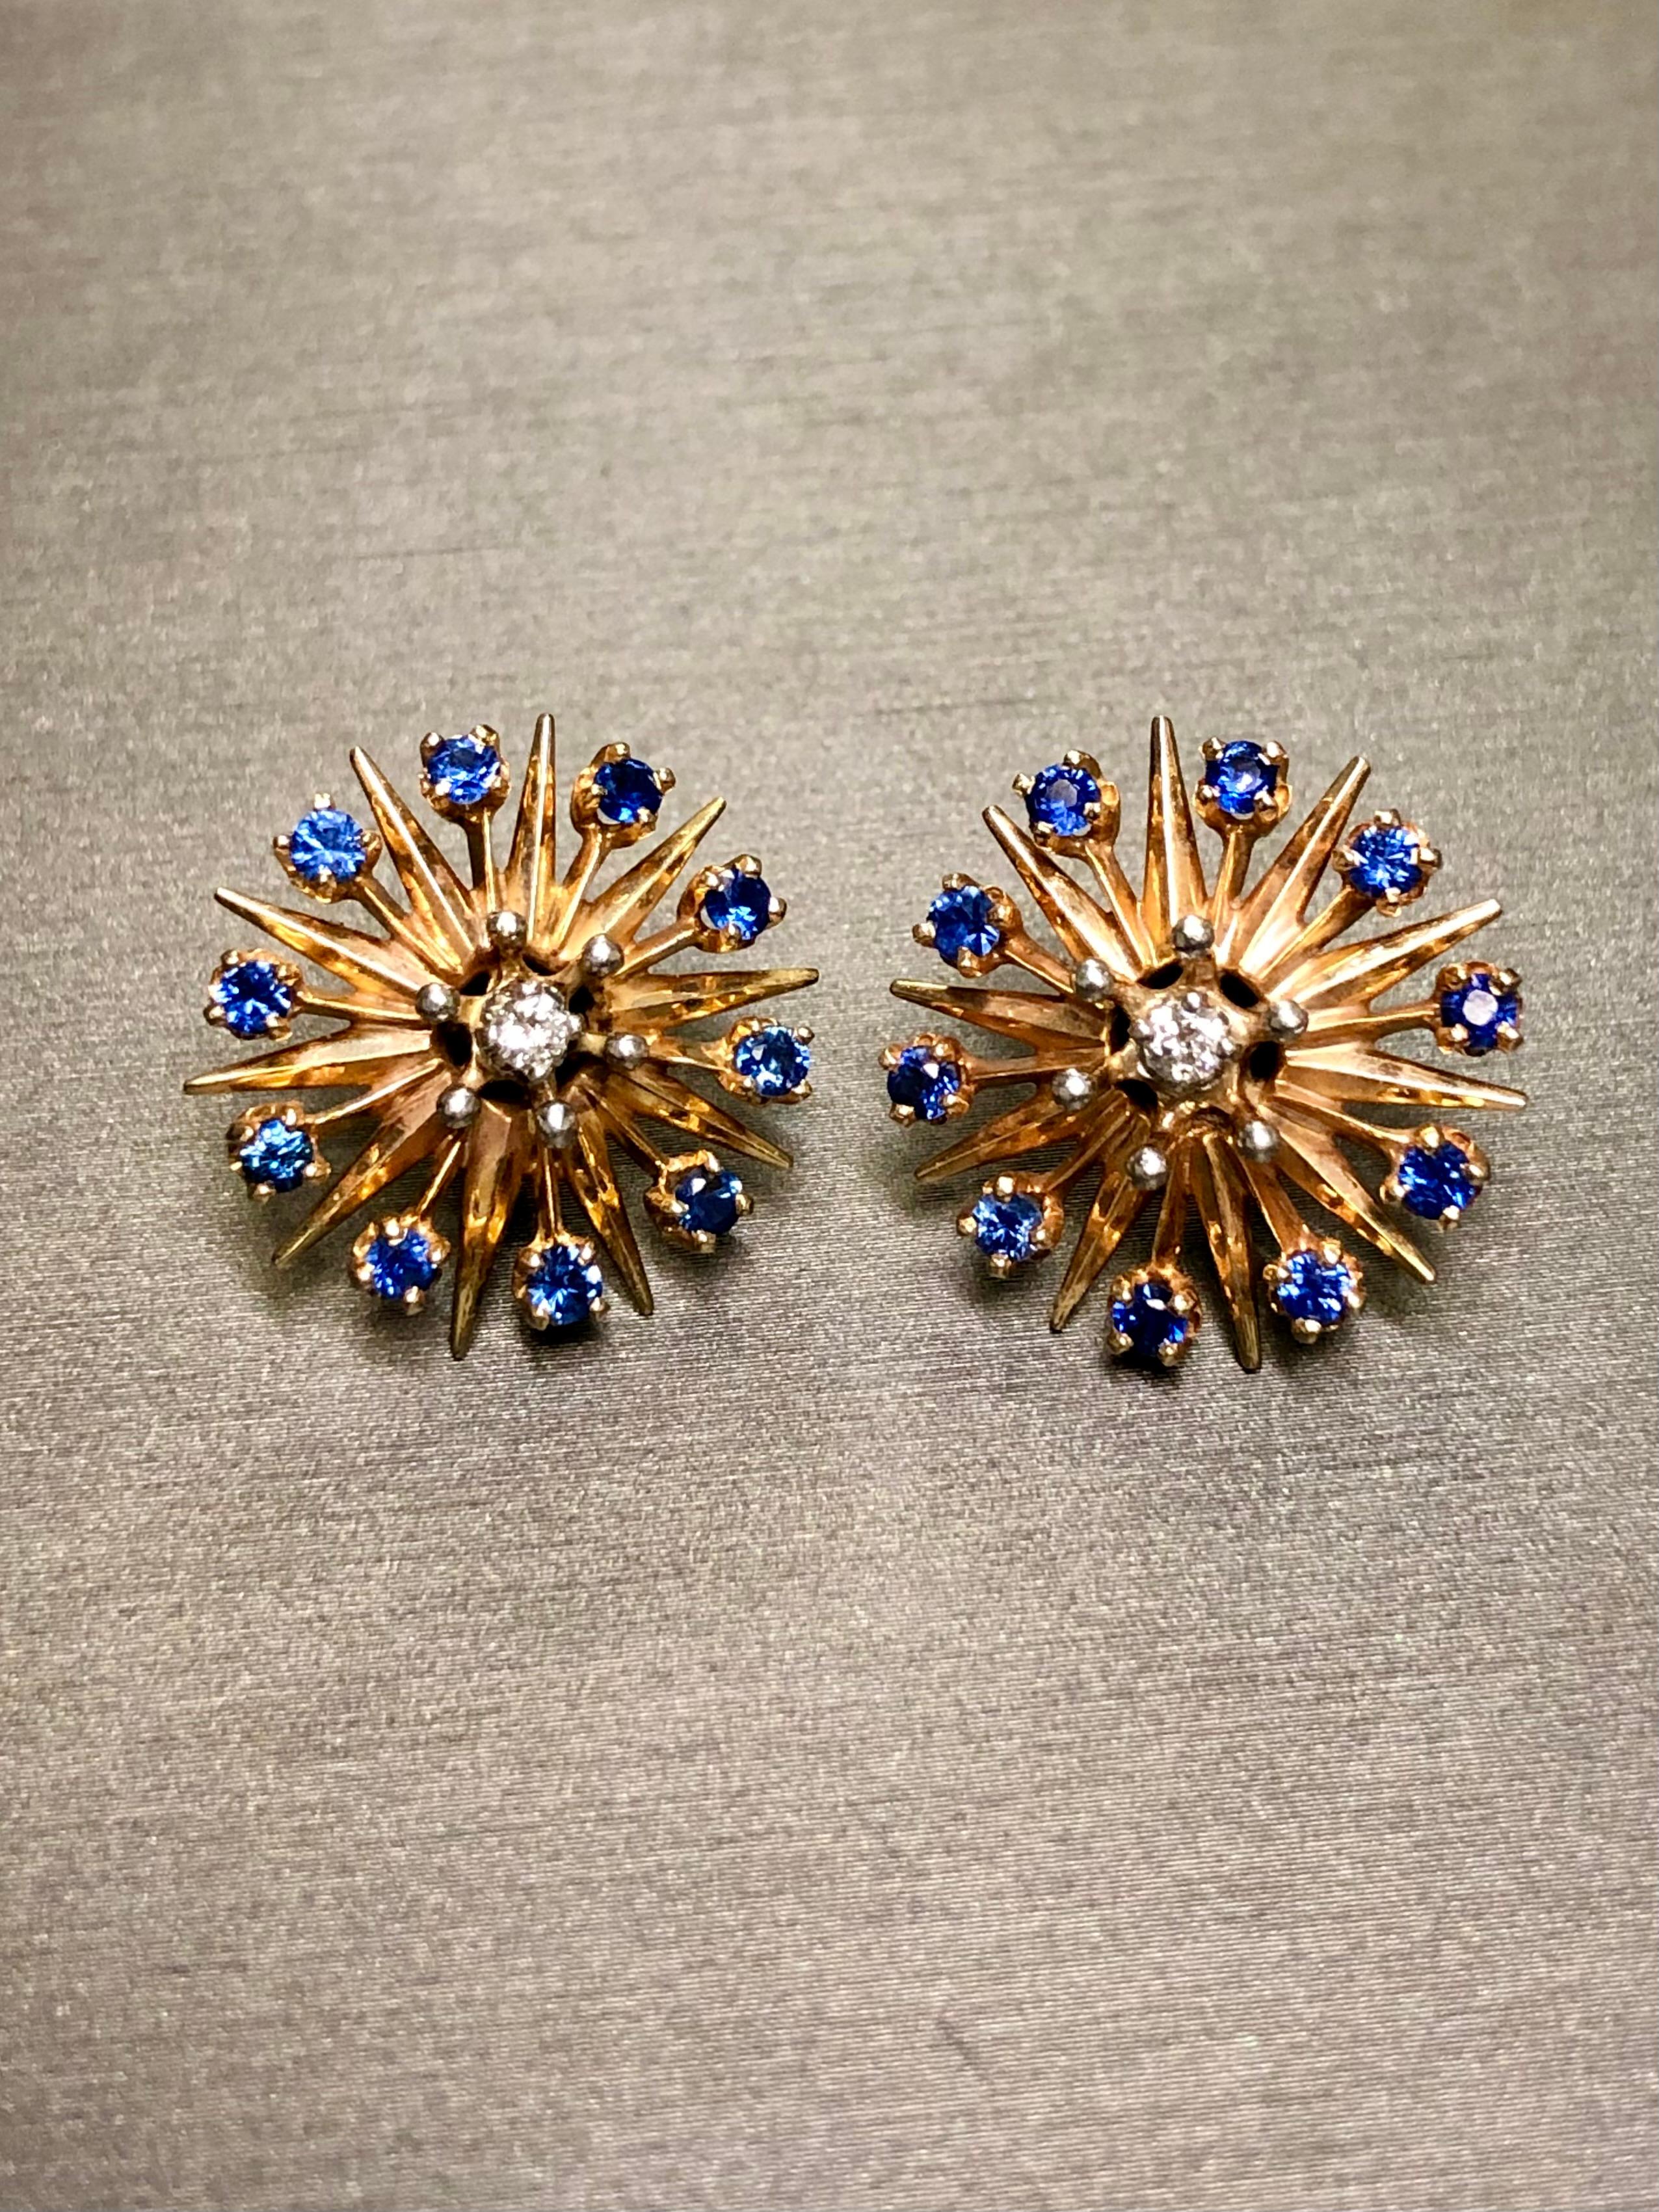 
A striking pair of original Art Deco earrings done in 14K and set with approximately .12cttw in G-H Vs1-2 round diamonds and 1cttw in no heat natural sapphires. Earrings have posts with friction backs. Sale is accompanied by the original GIA